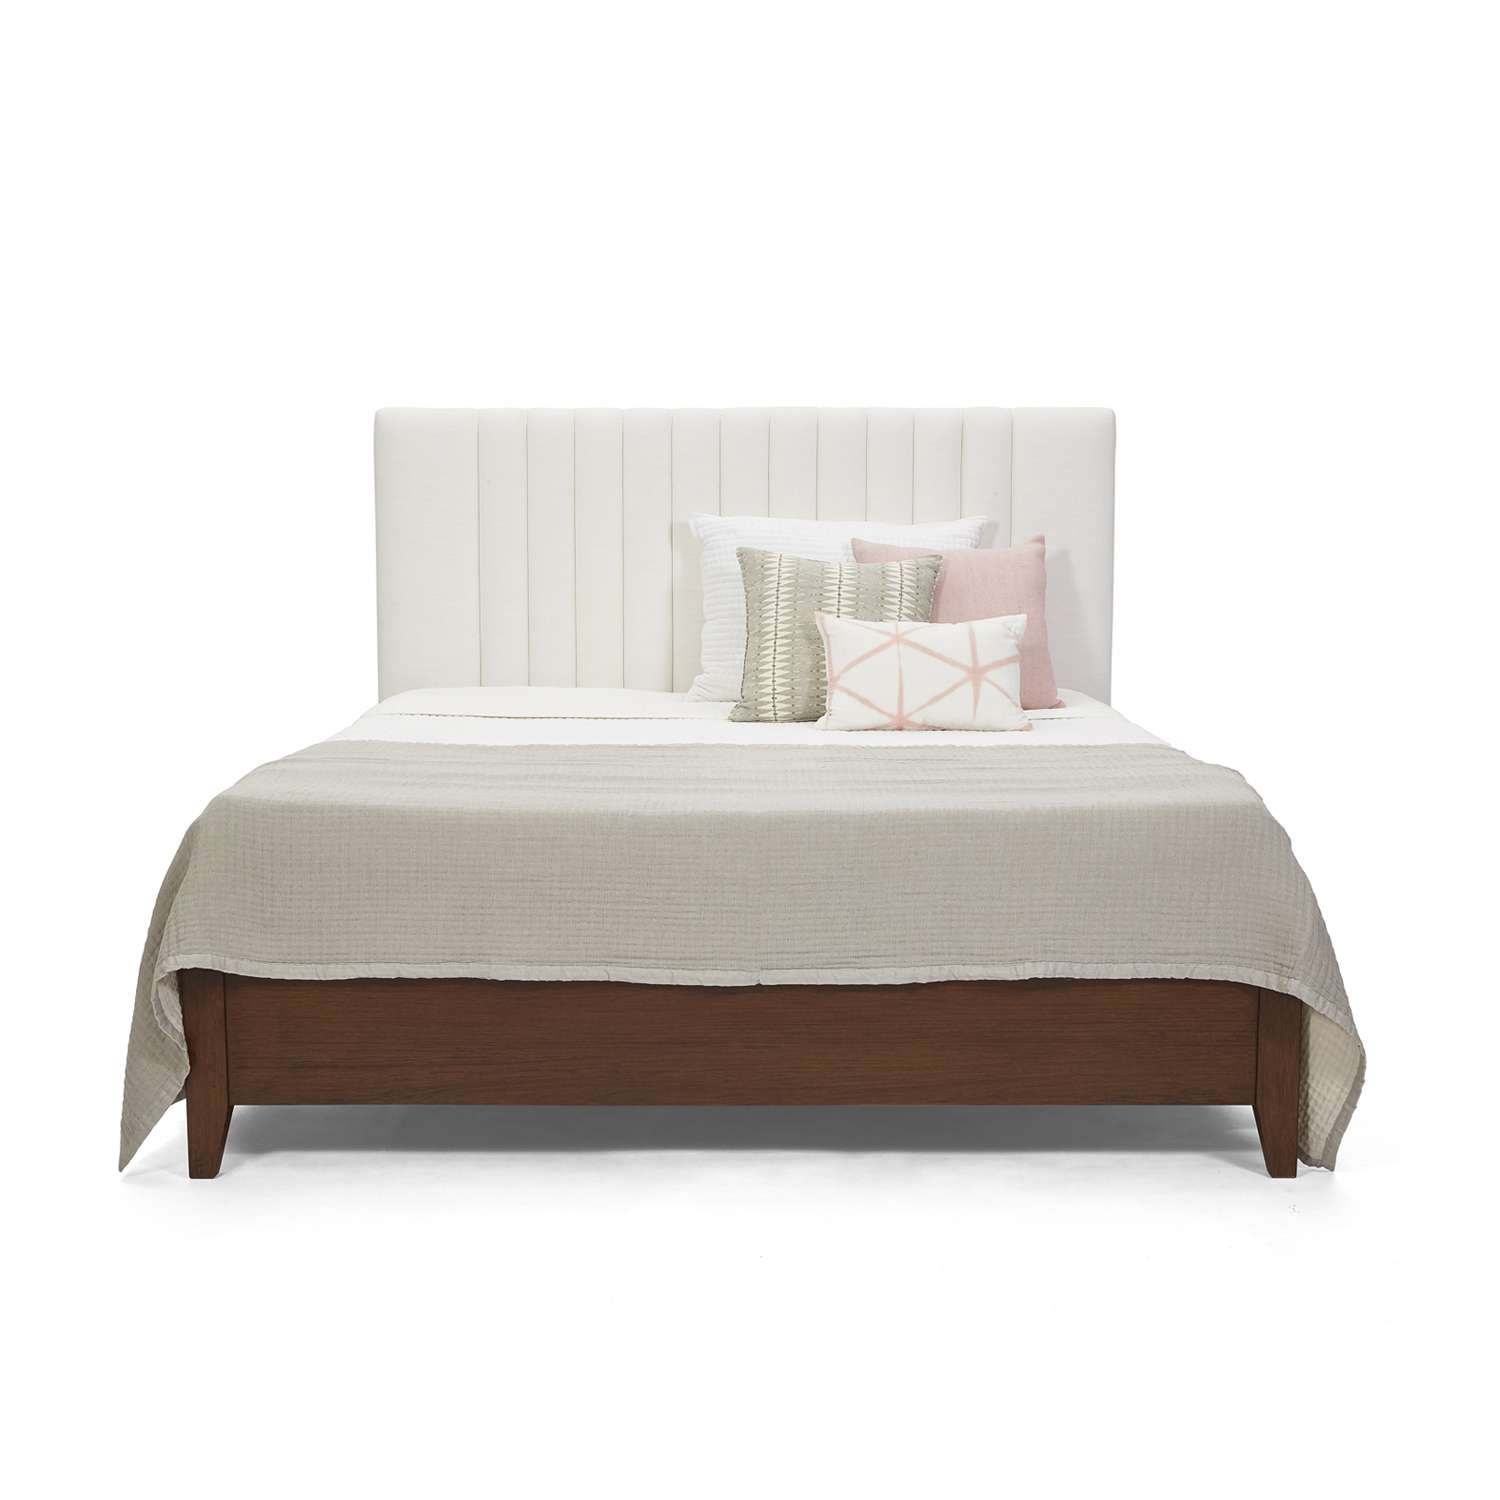 LORENCE CANE BED